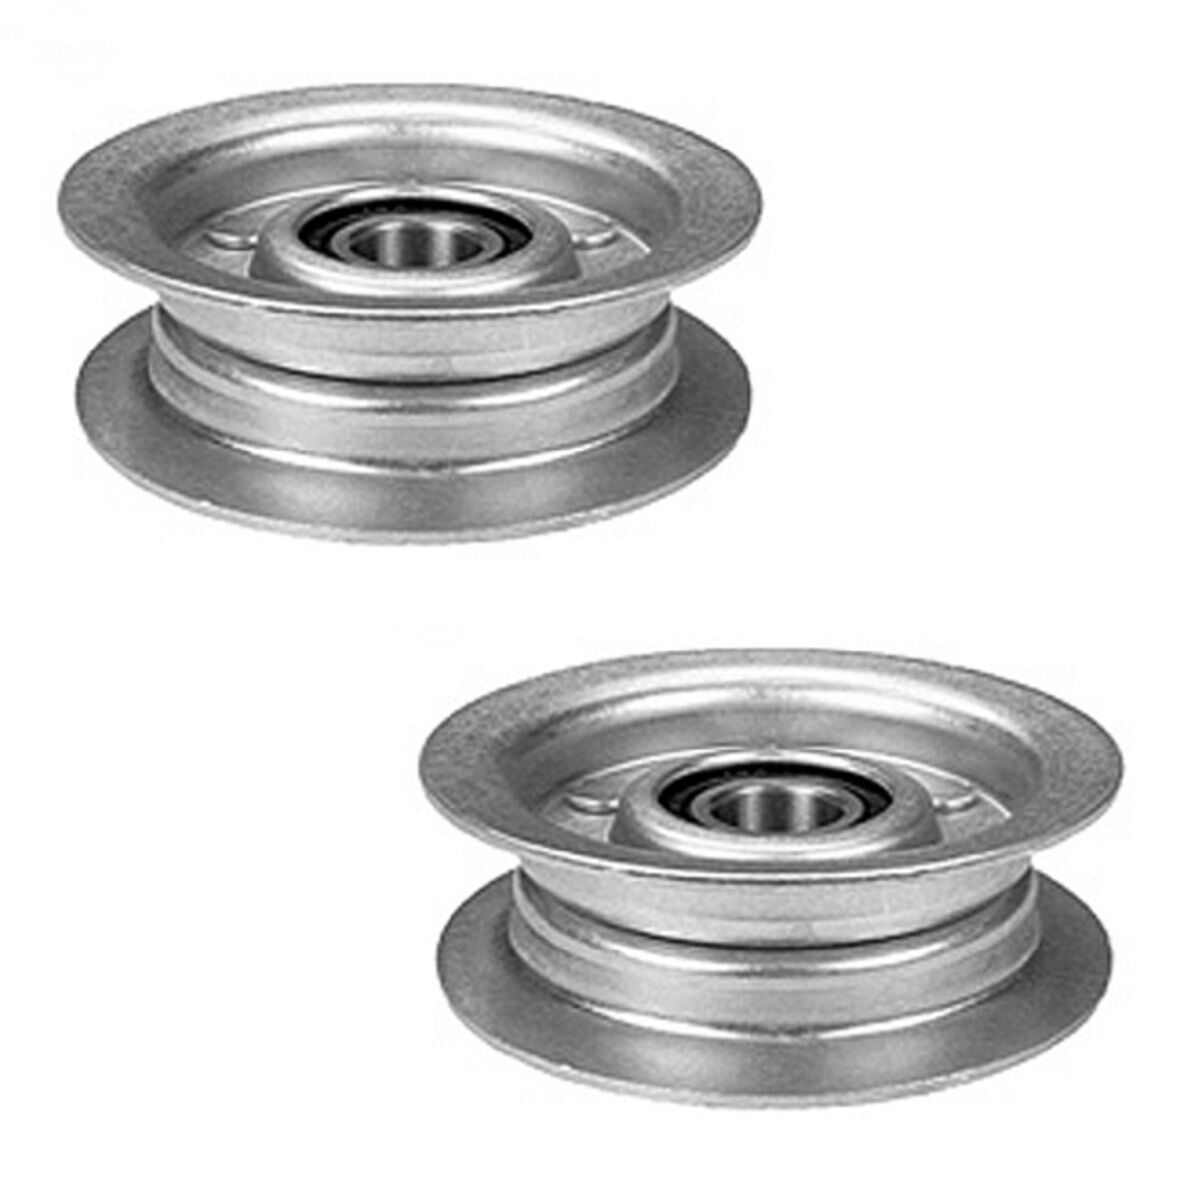 2 pk Flat Idler Pulley For GY20067 L110 L120 L130 14542GS 1642HS 1742HS Tractors - $28.59